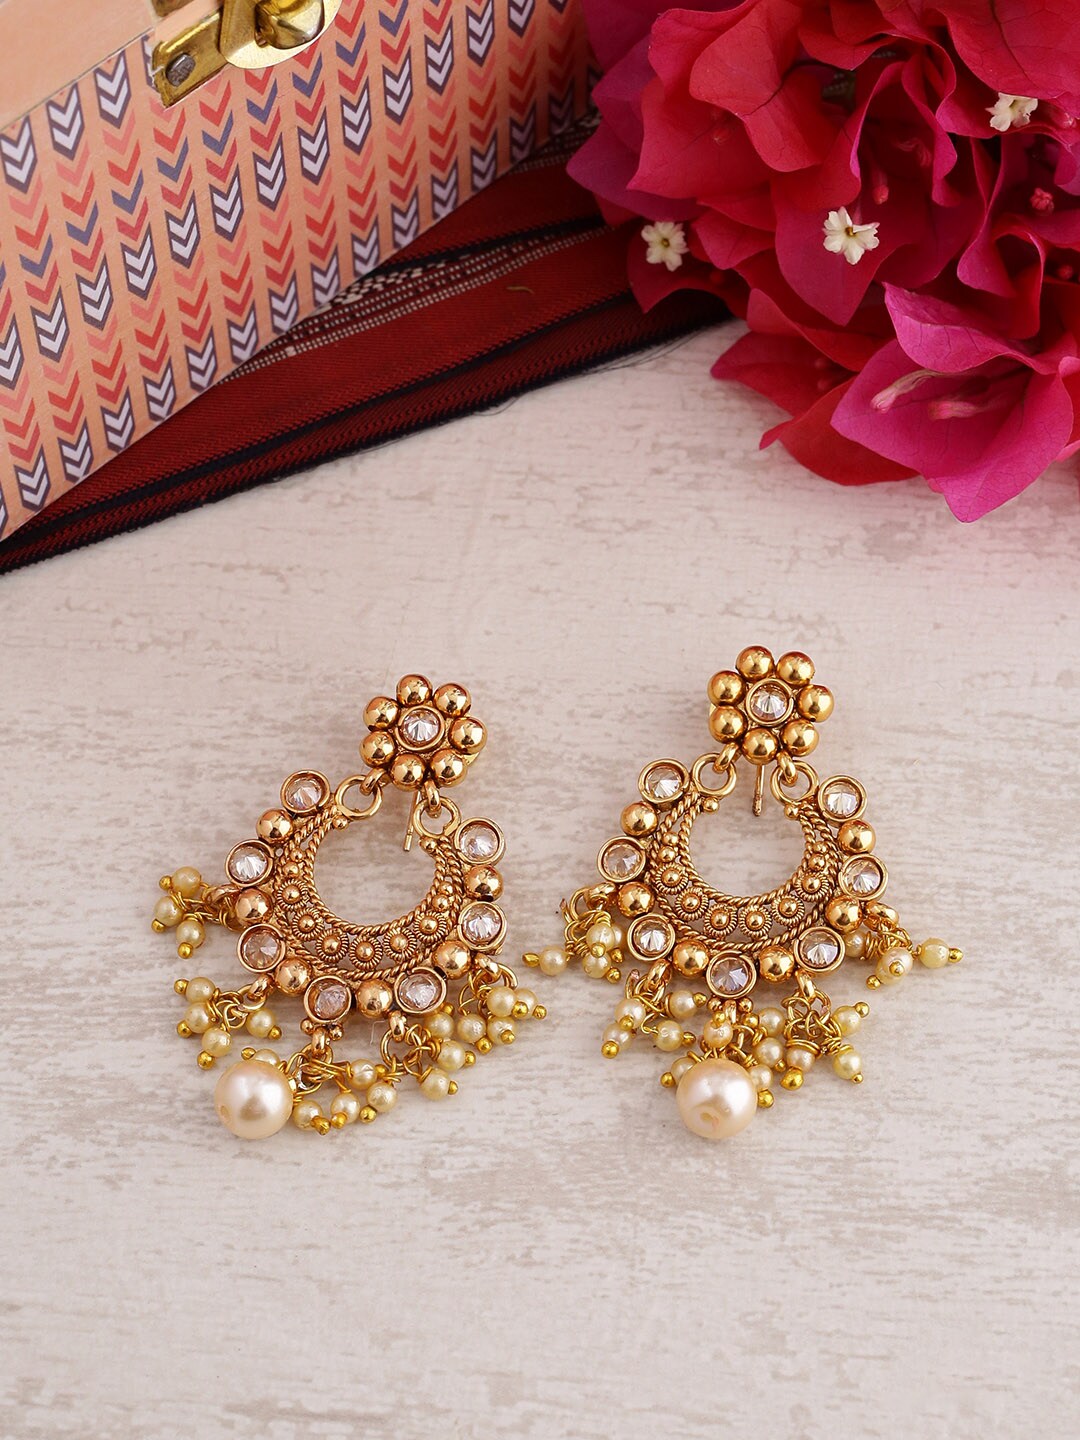 Voylla Gold-Toned Handcrafted Classic Drop Earrings